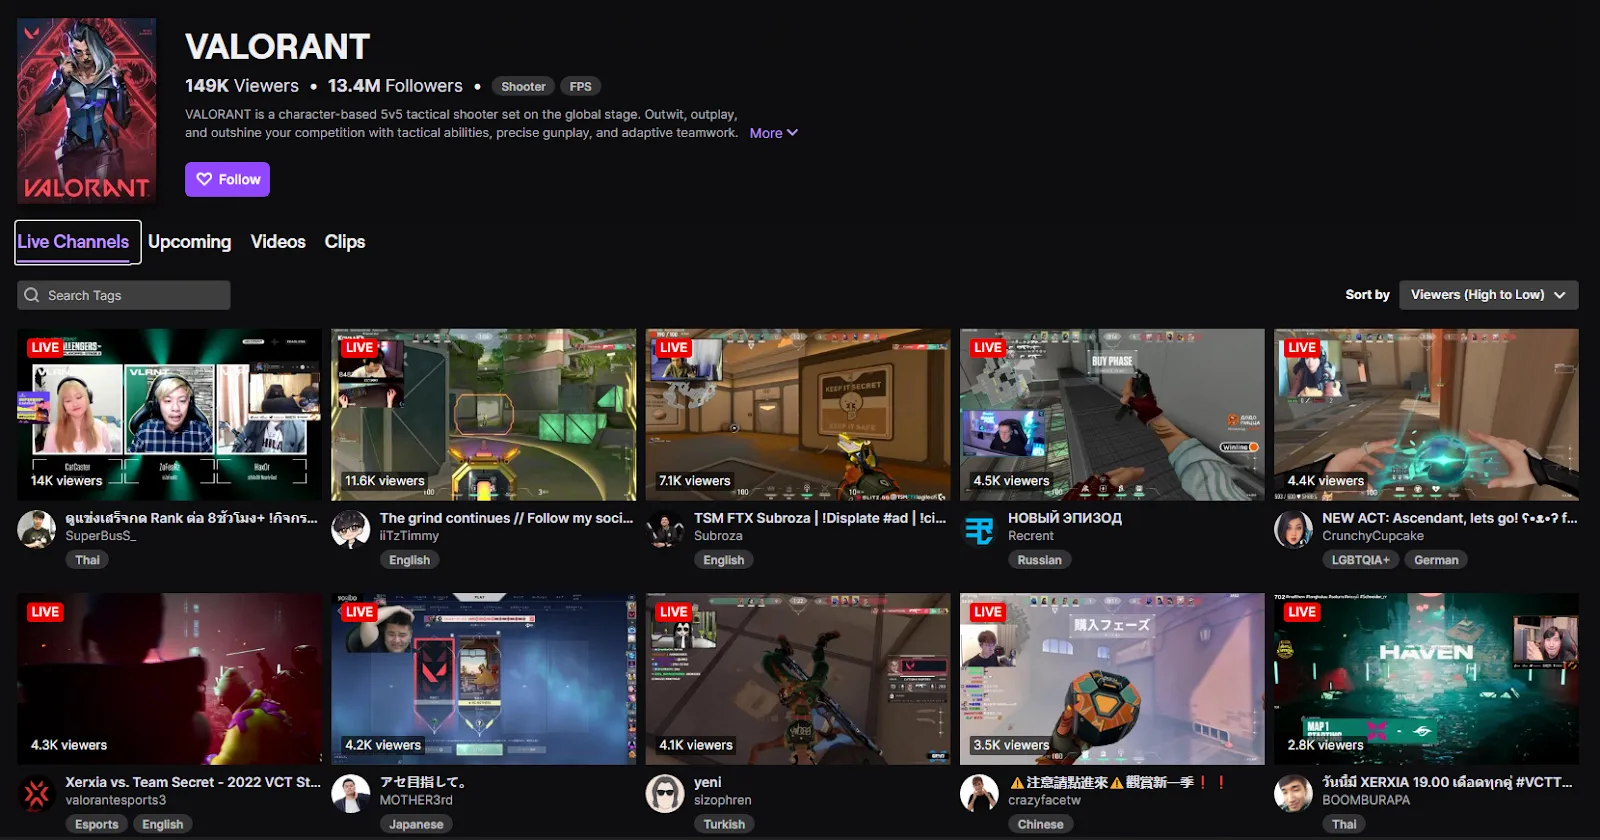 With 13.4 million followers on Twitch, there must be some potential viewers for you.